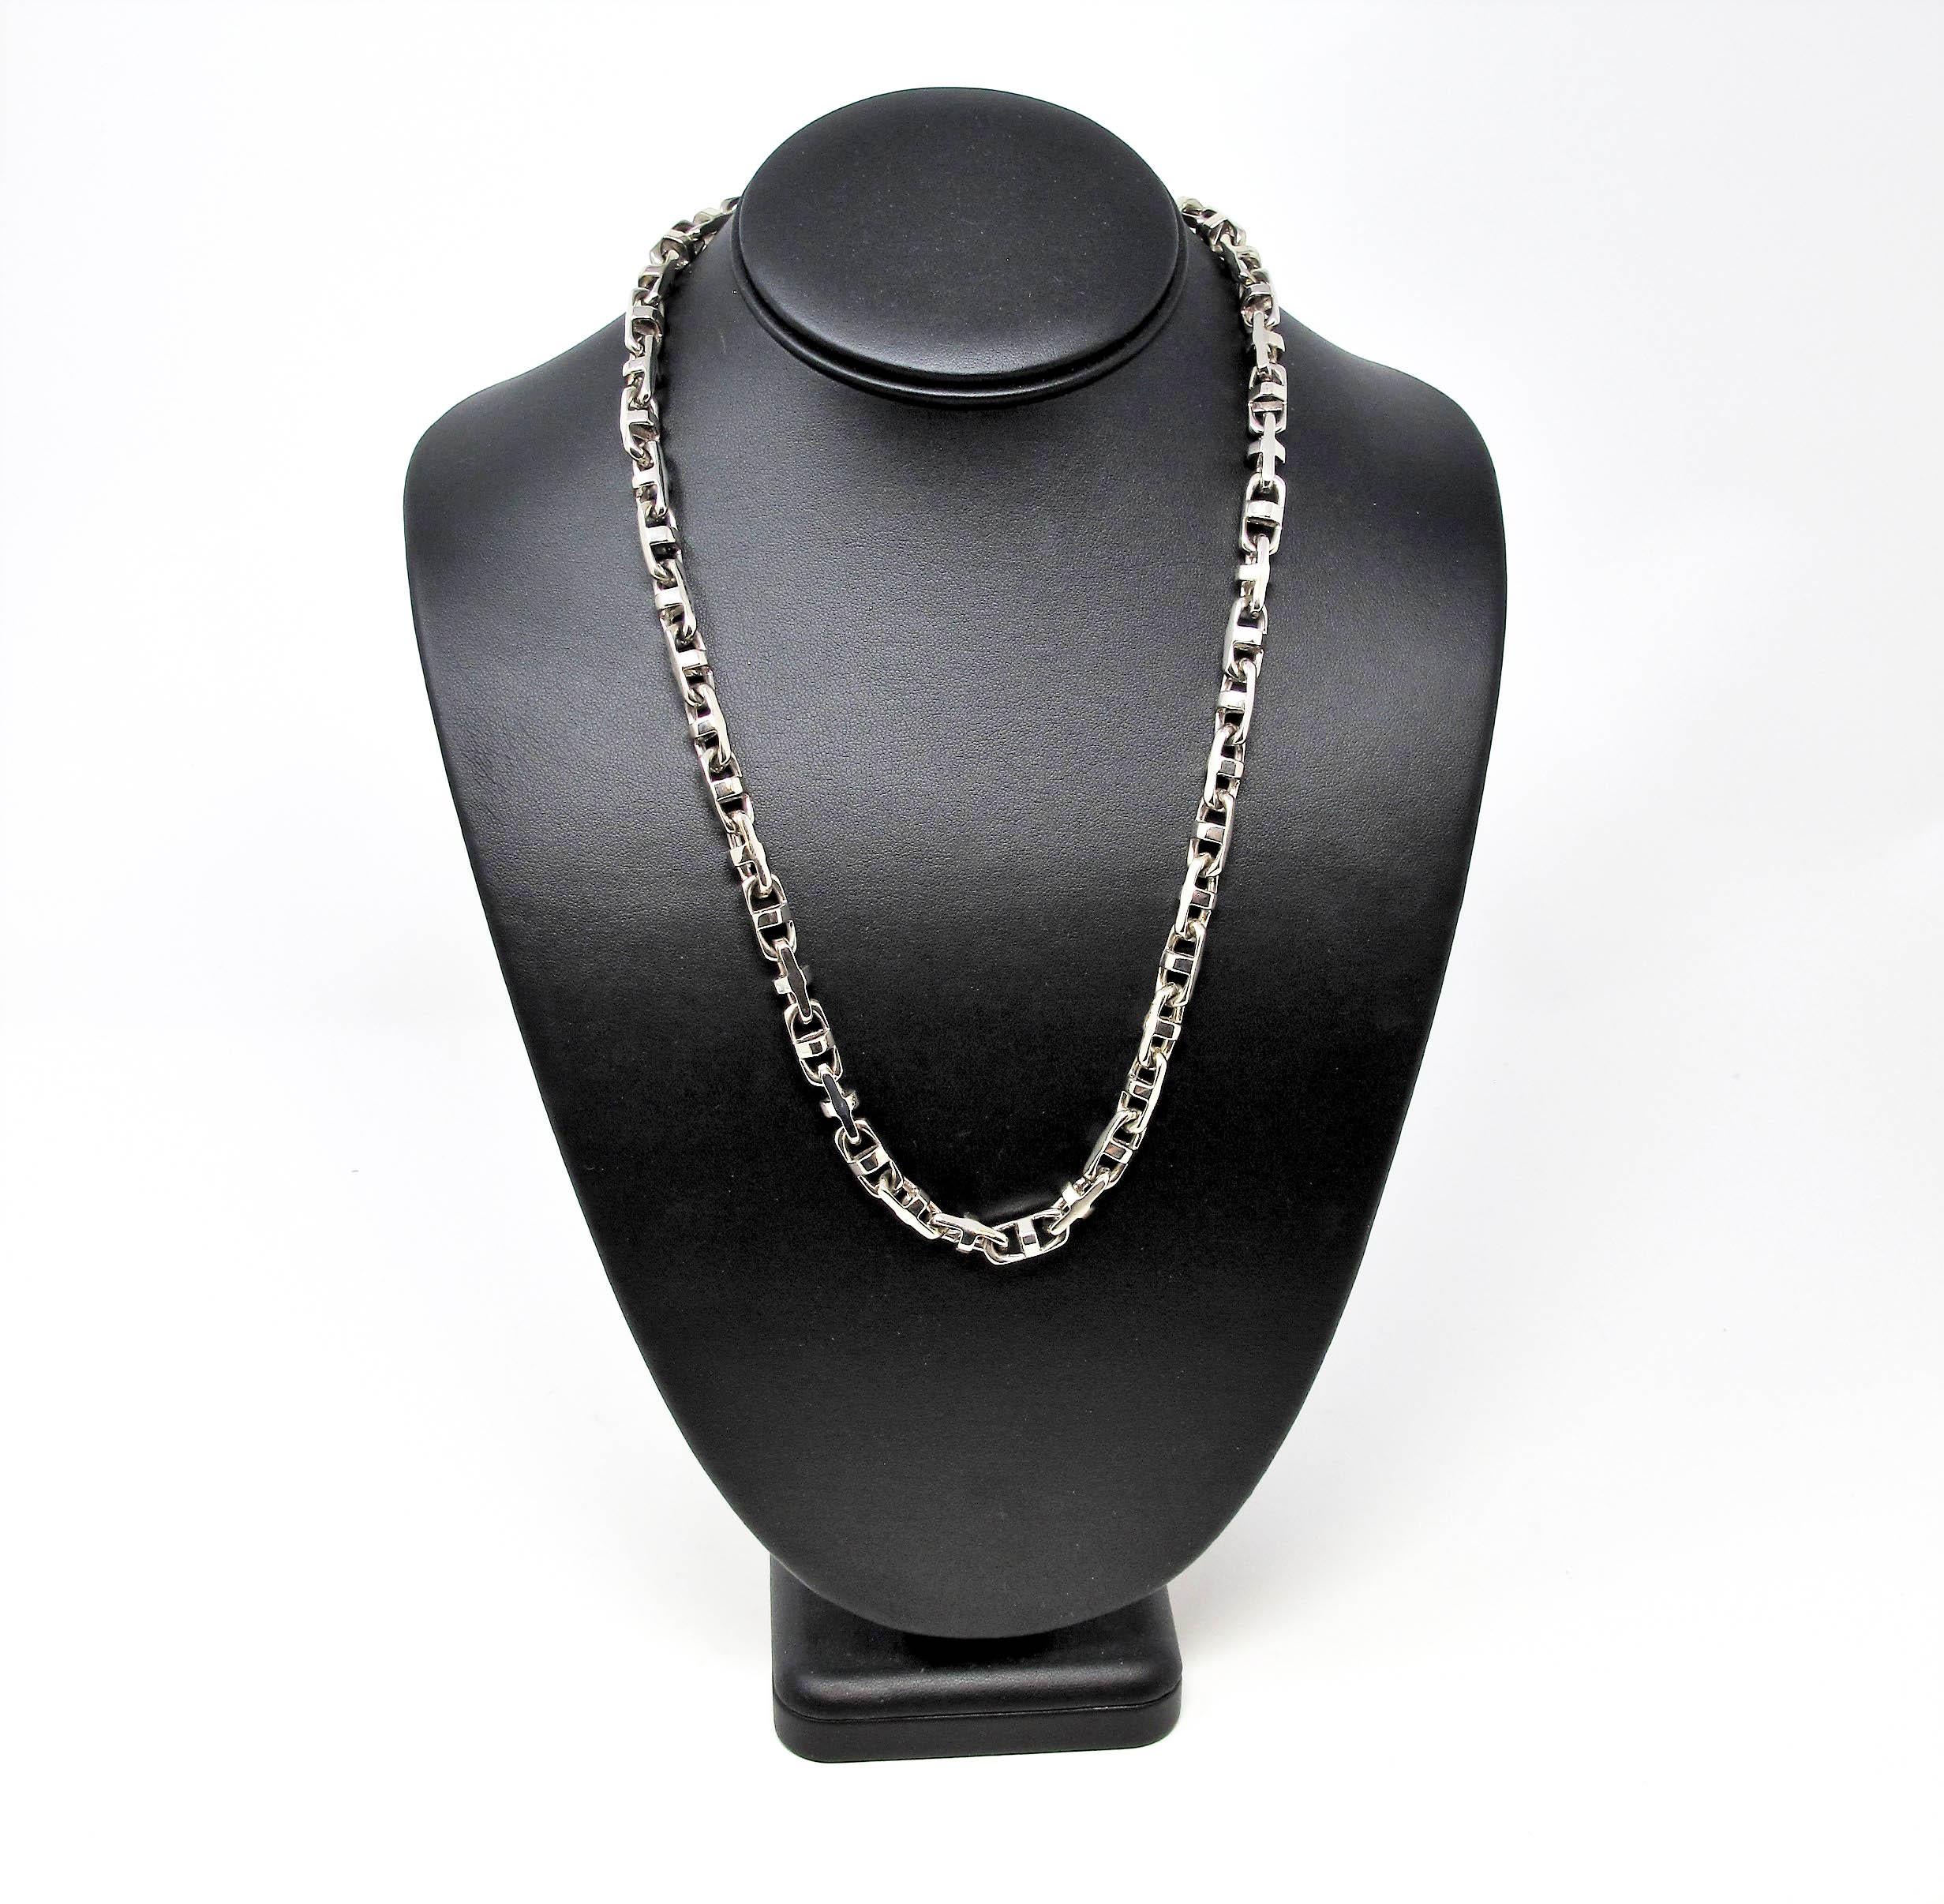 Handsome, high quality designer mens 14 karat white gold chain necklace by Braccio. With its simple, yet modern style, the possibilities are endless! Layer with other pieces, enhance with a unique pendant, or simply wear on its own. 

This bold